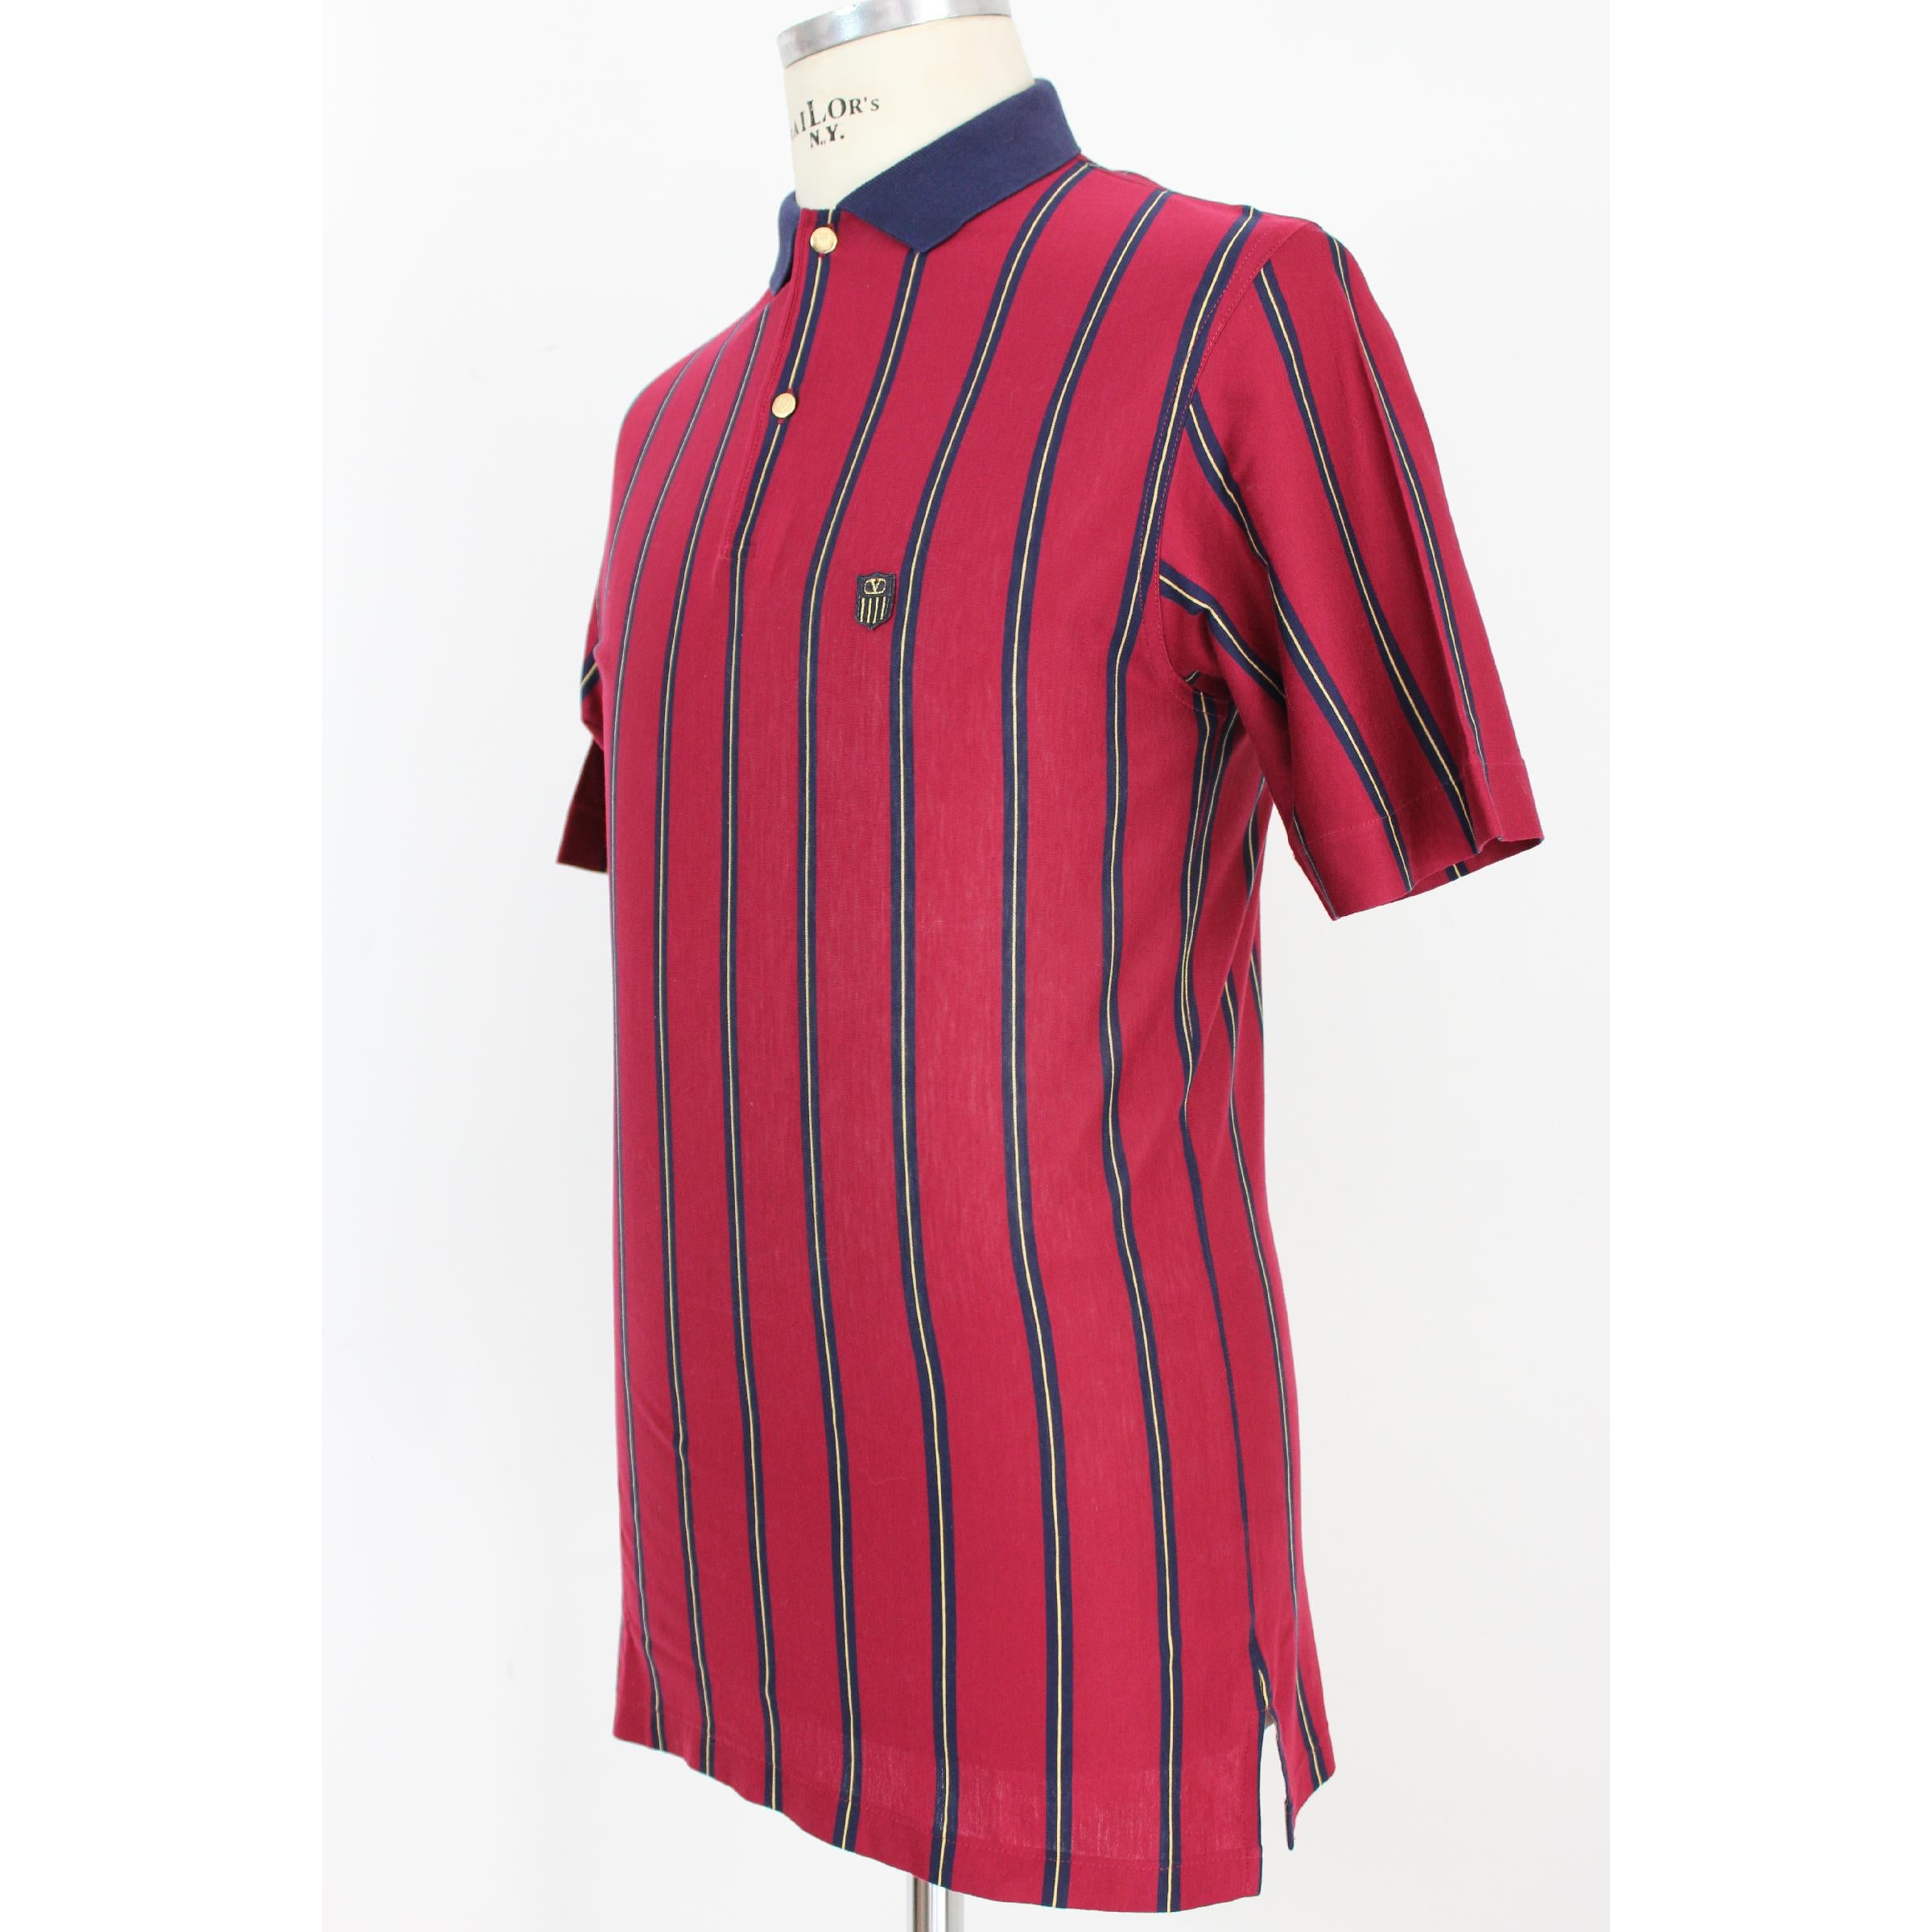 Valentino Sport men's vintage shirt. Polo model, red and blue striped, 100% cotton, short sleeve. 80s. Made in Italy. Excellent vintage condition. 

Size: 46 It 36 Us 36 Uk 

Shoulder: 46 cm
Bust/Chest: 48 cm 
Sleeve: 25 cm 
Length: 78 cm